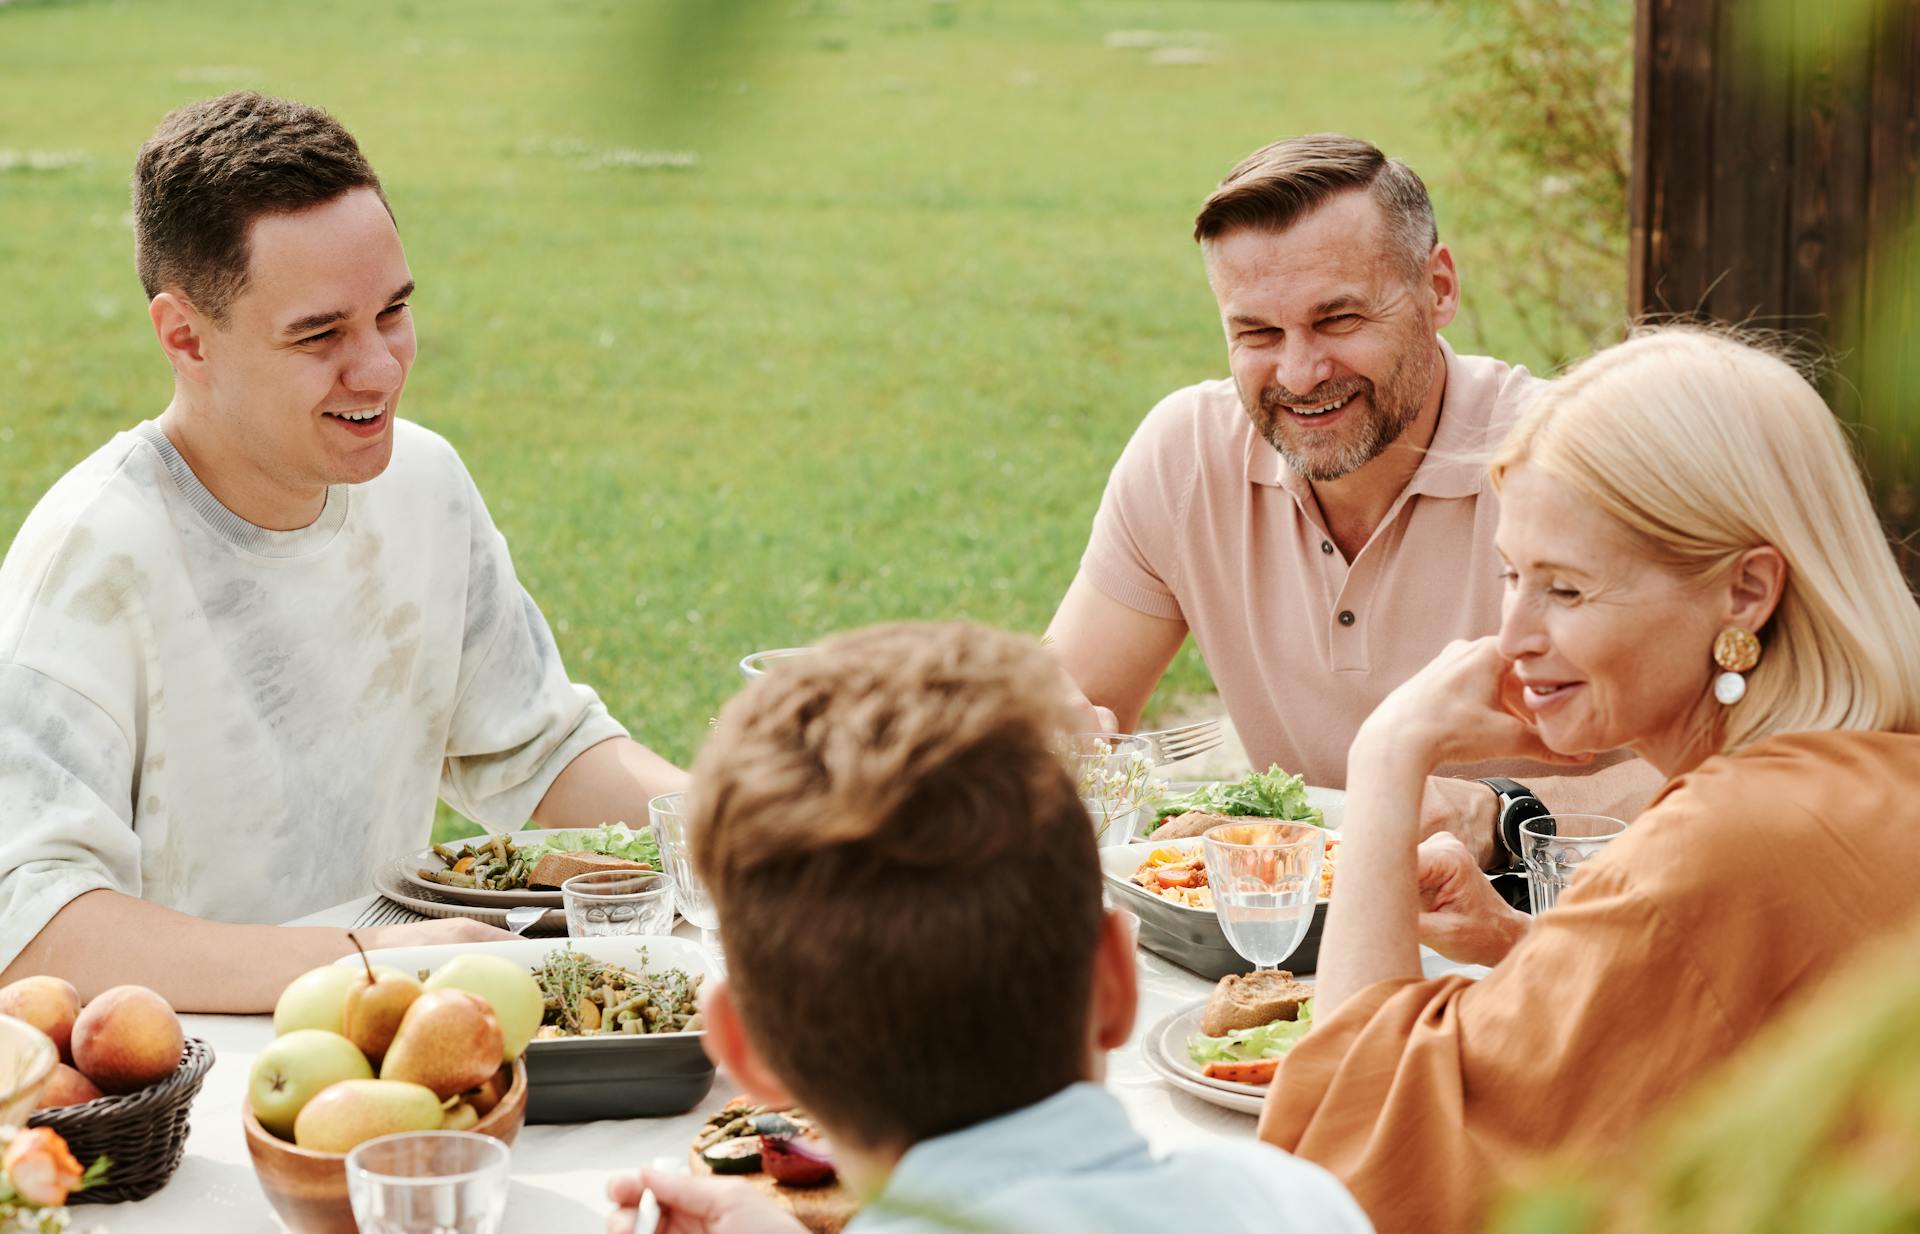 Family members dining outdoors | Source: Pexels